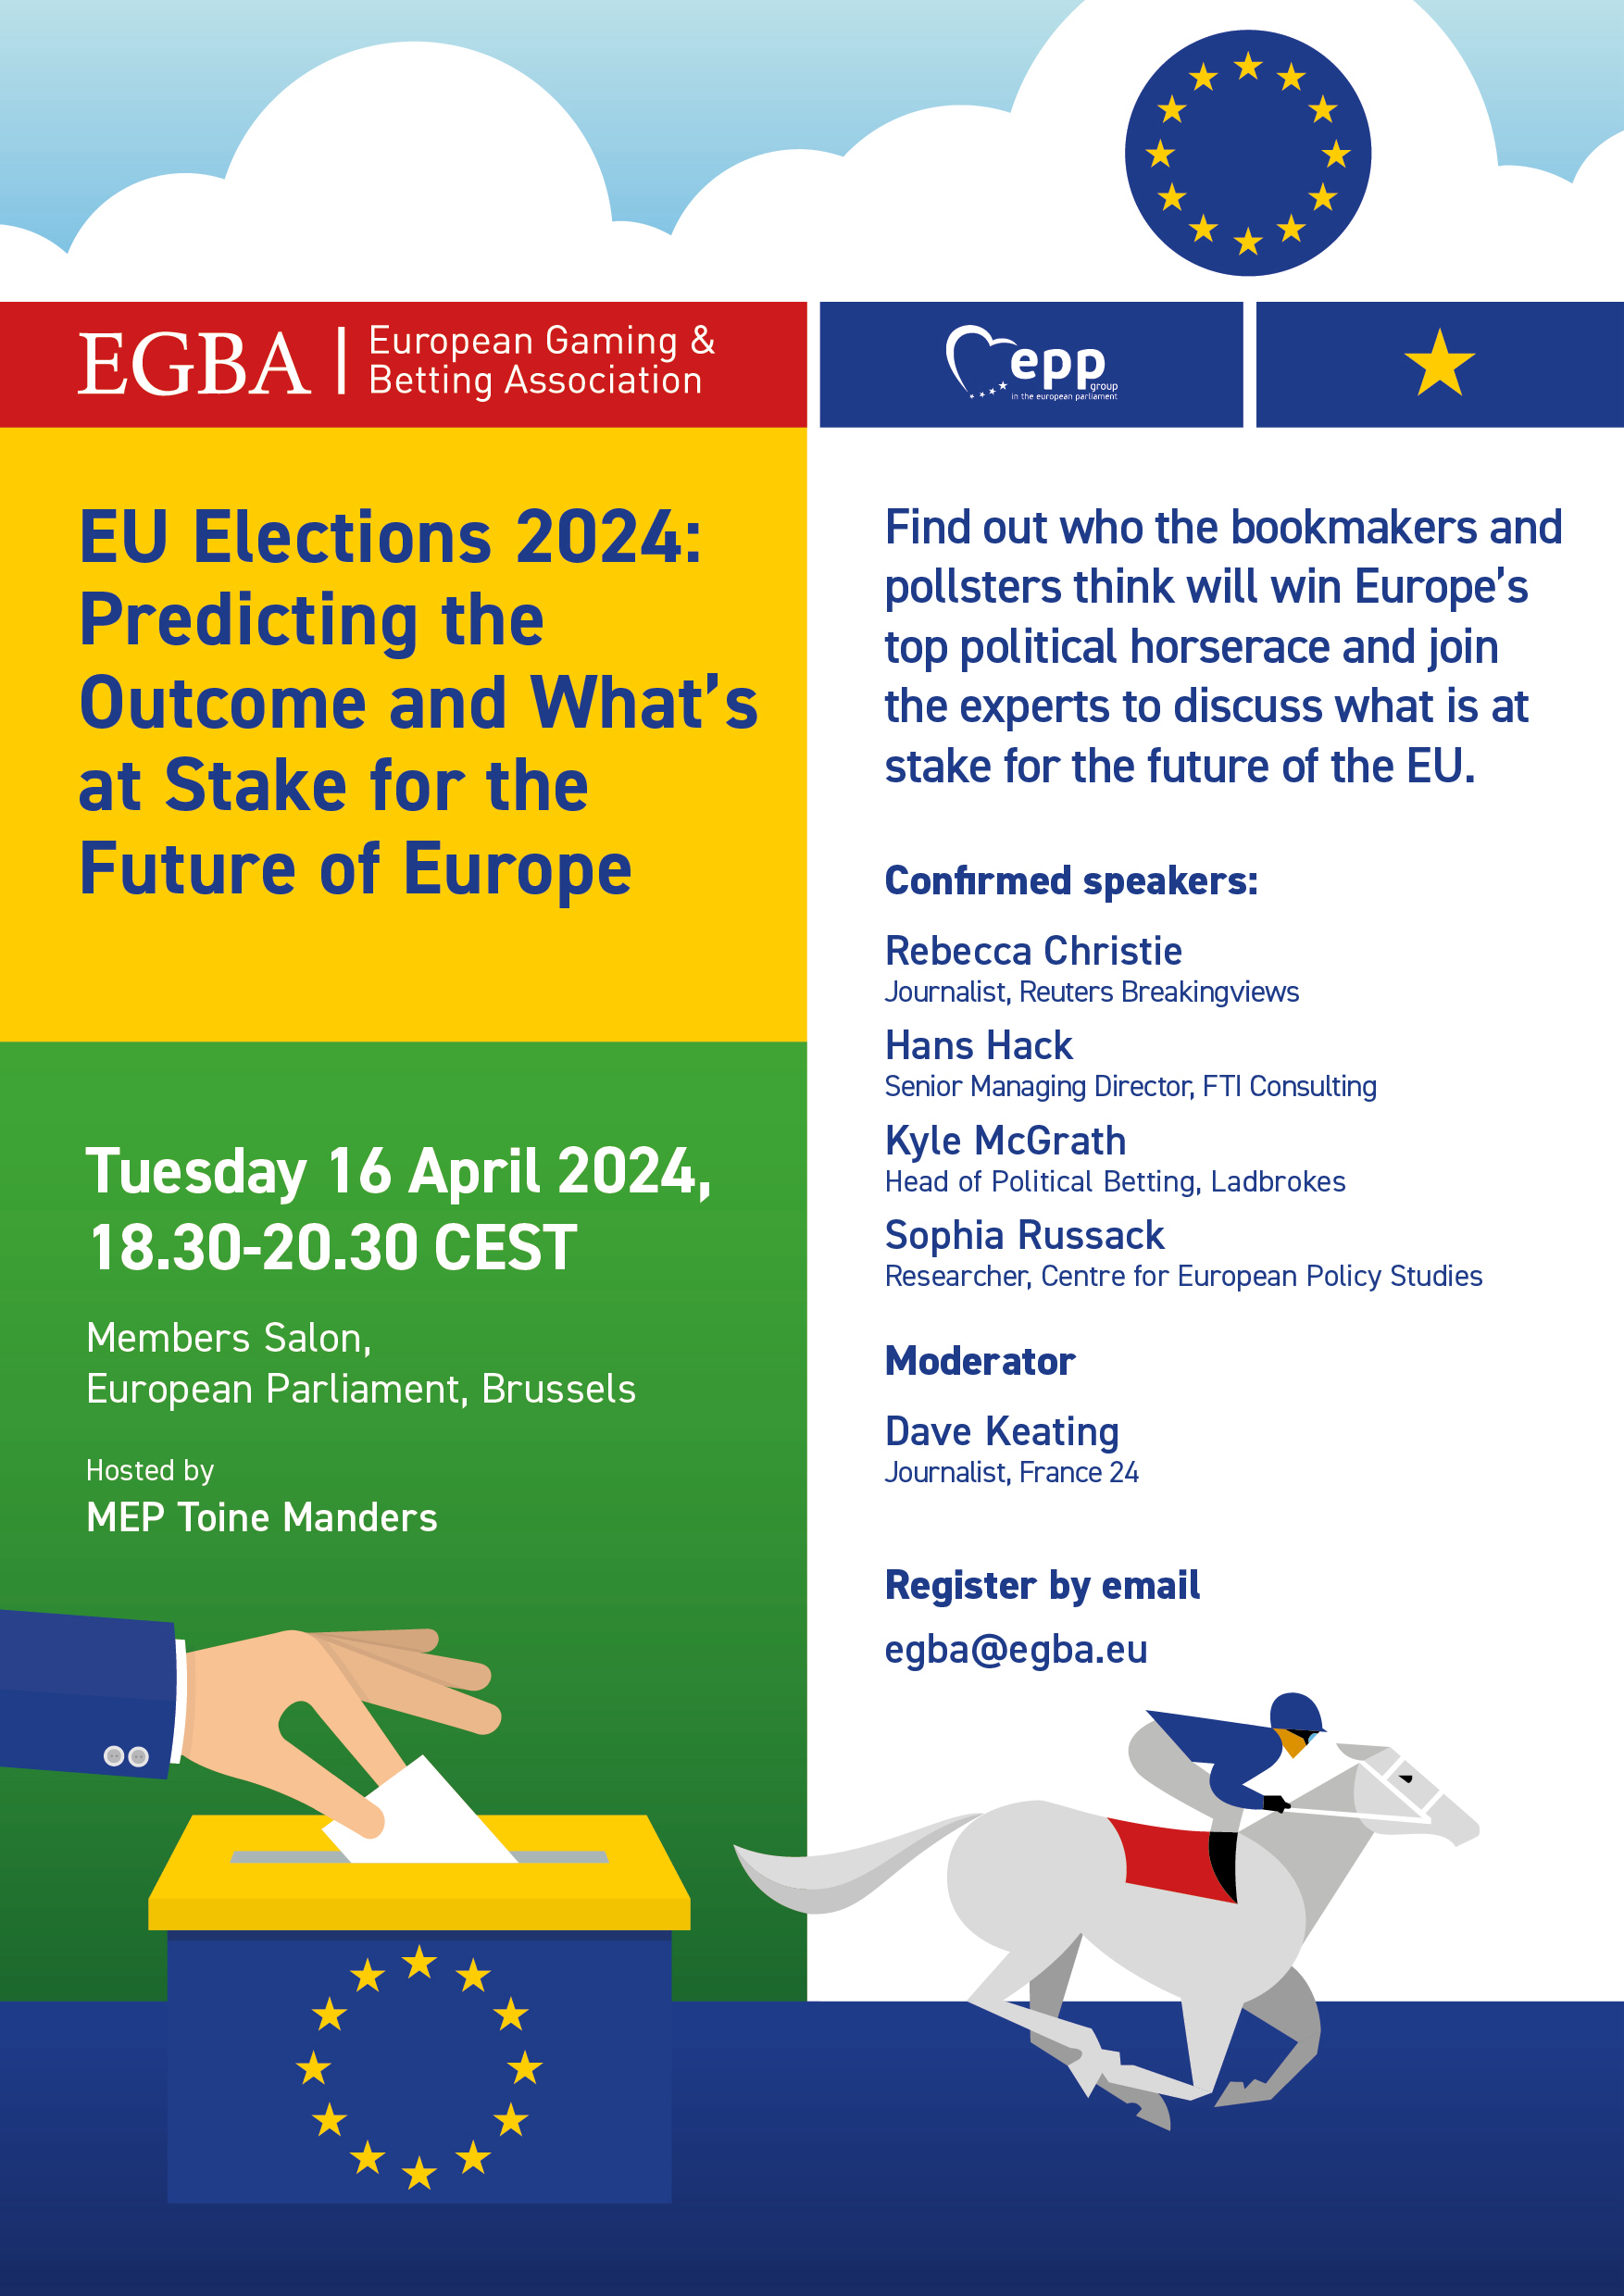 EU Elections 2024: Predicting the Outcome and What's at Stake for the Future of Europe   